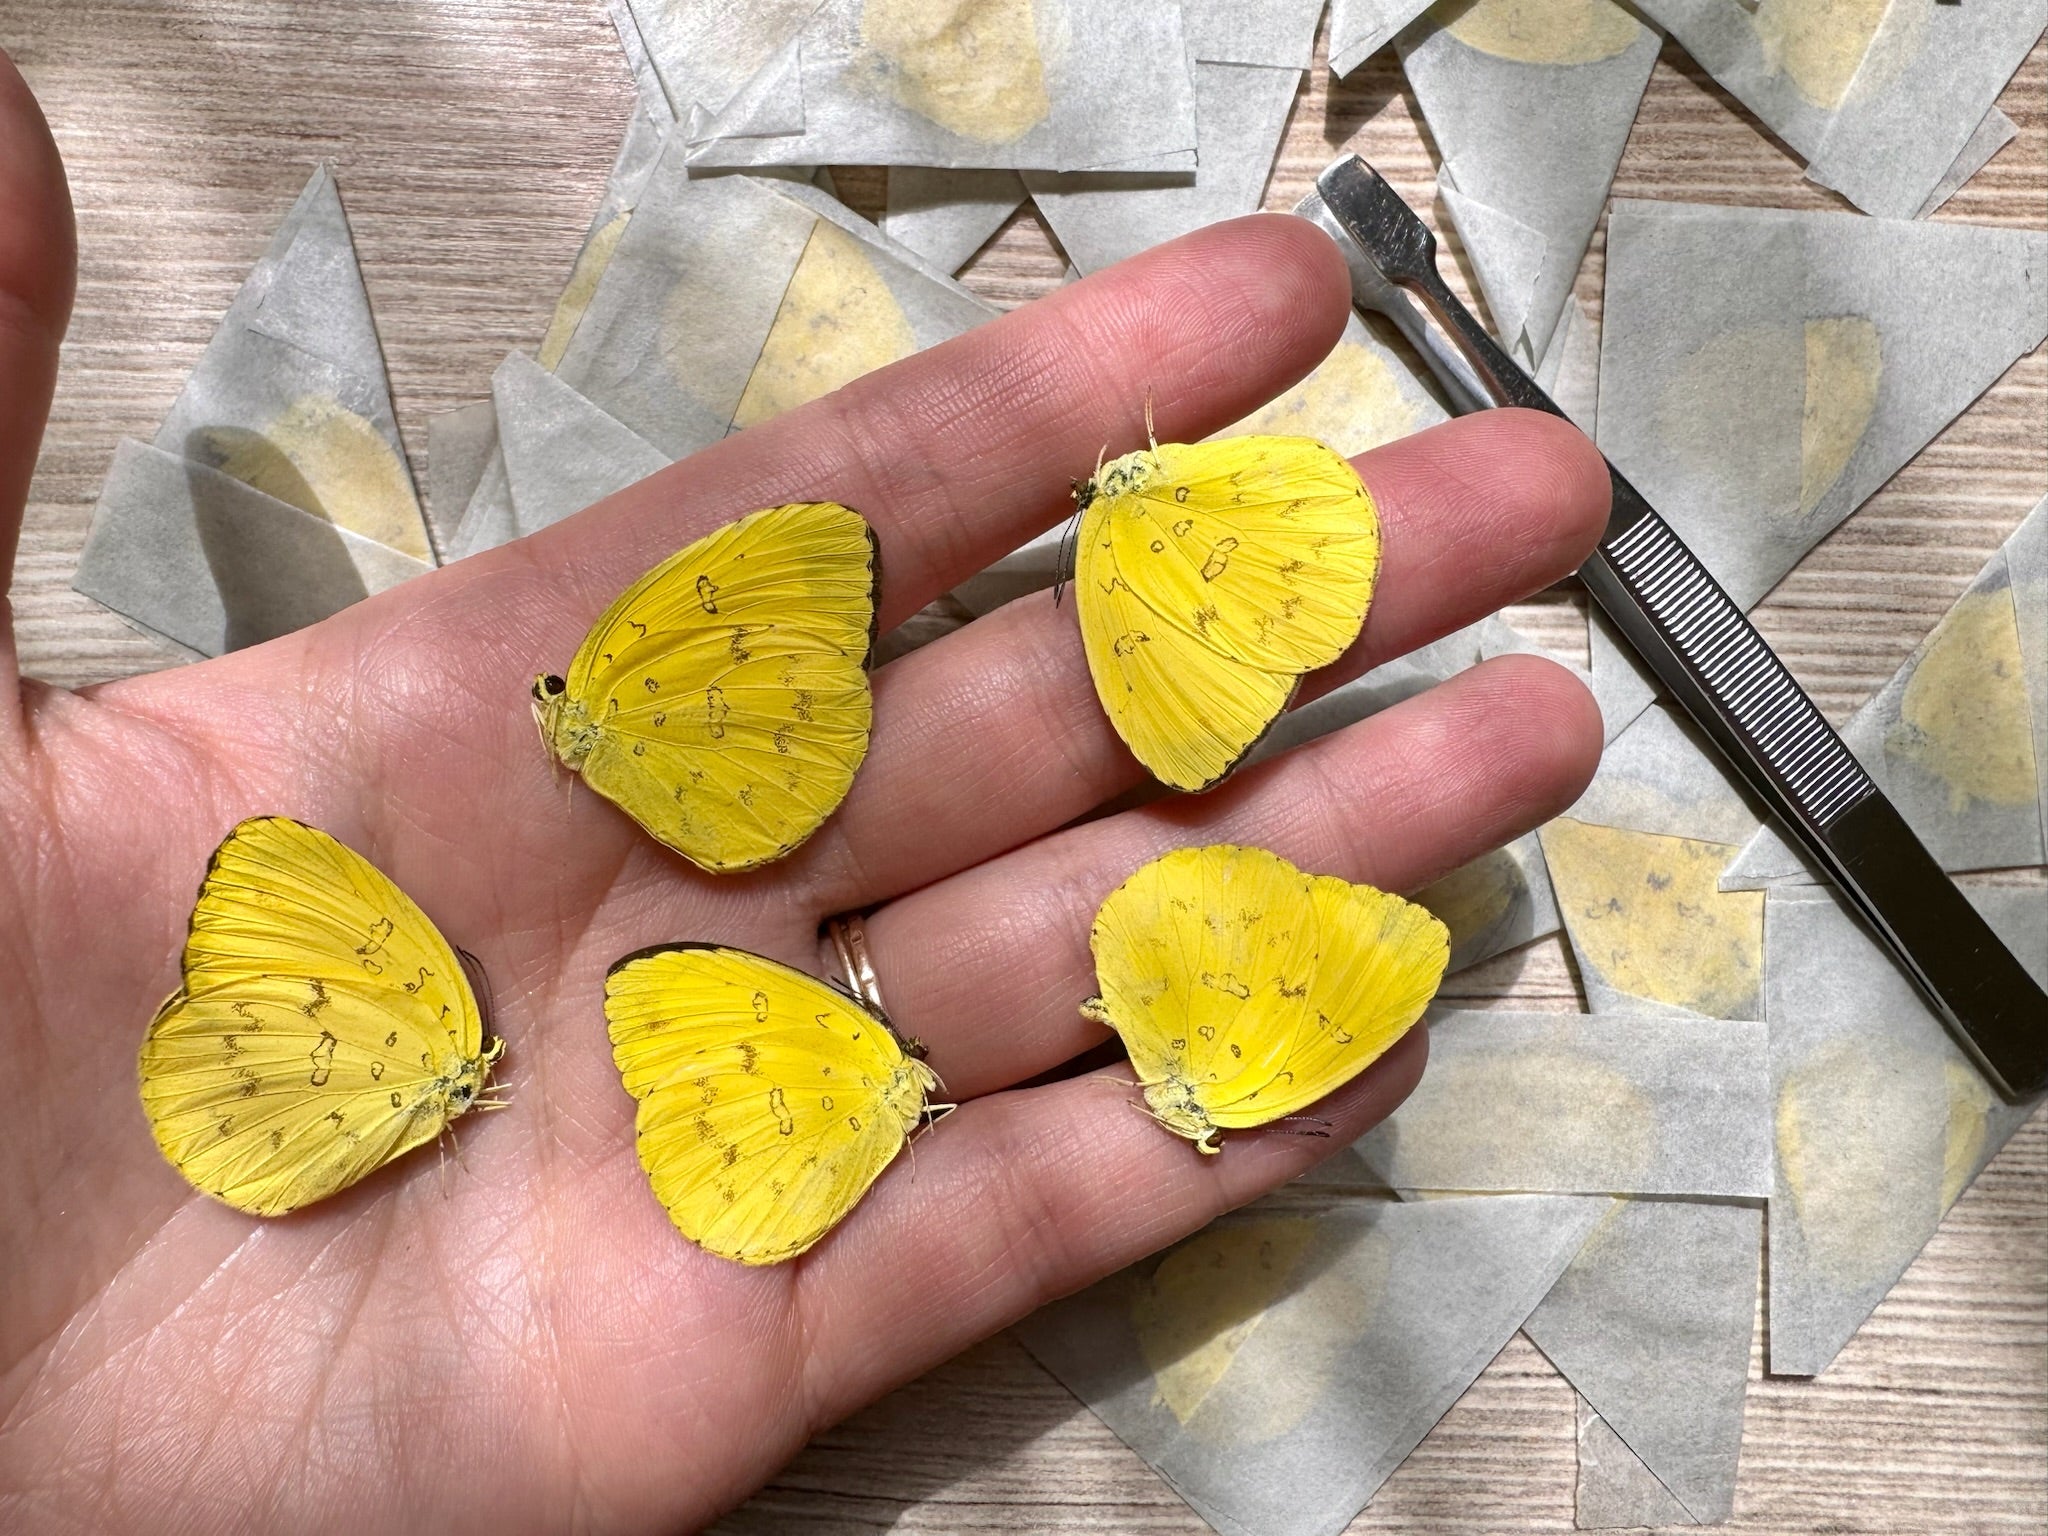 Lot of 5 REAL Yellow butterflies, Eurema hecabe, WHOLESALE